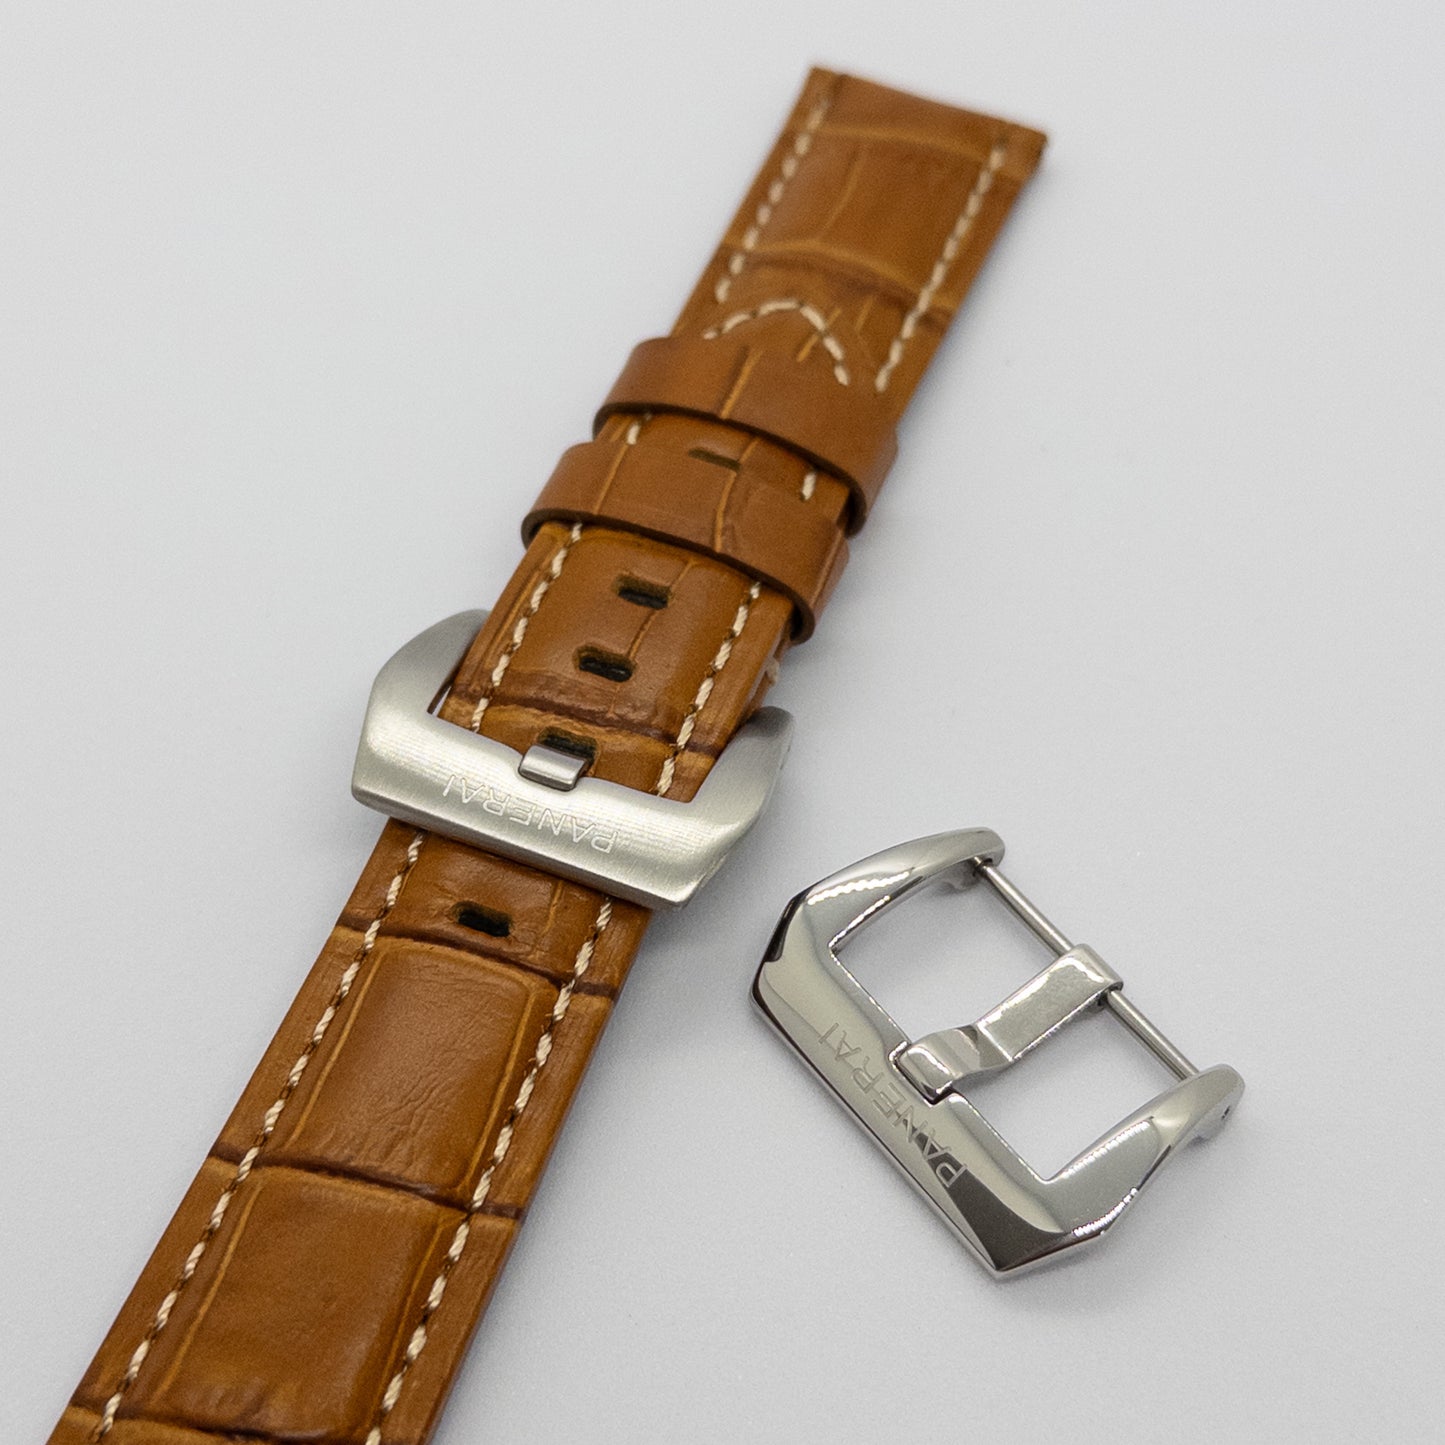 replacement panerai watch strap brown leather